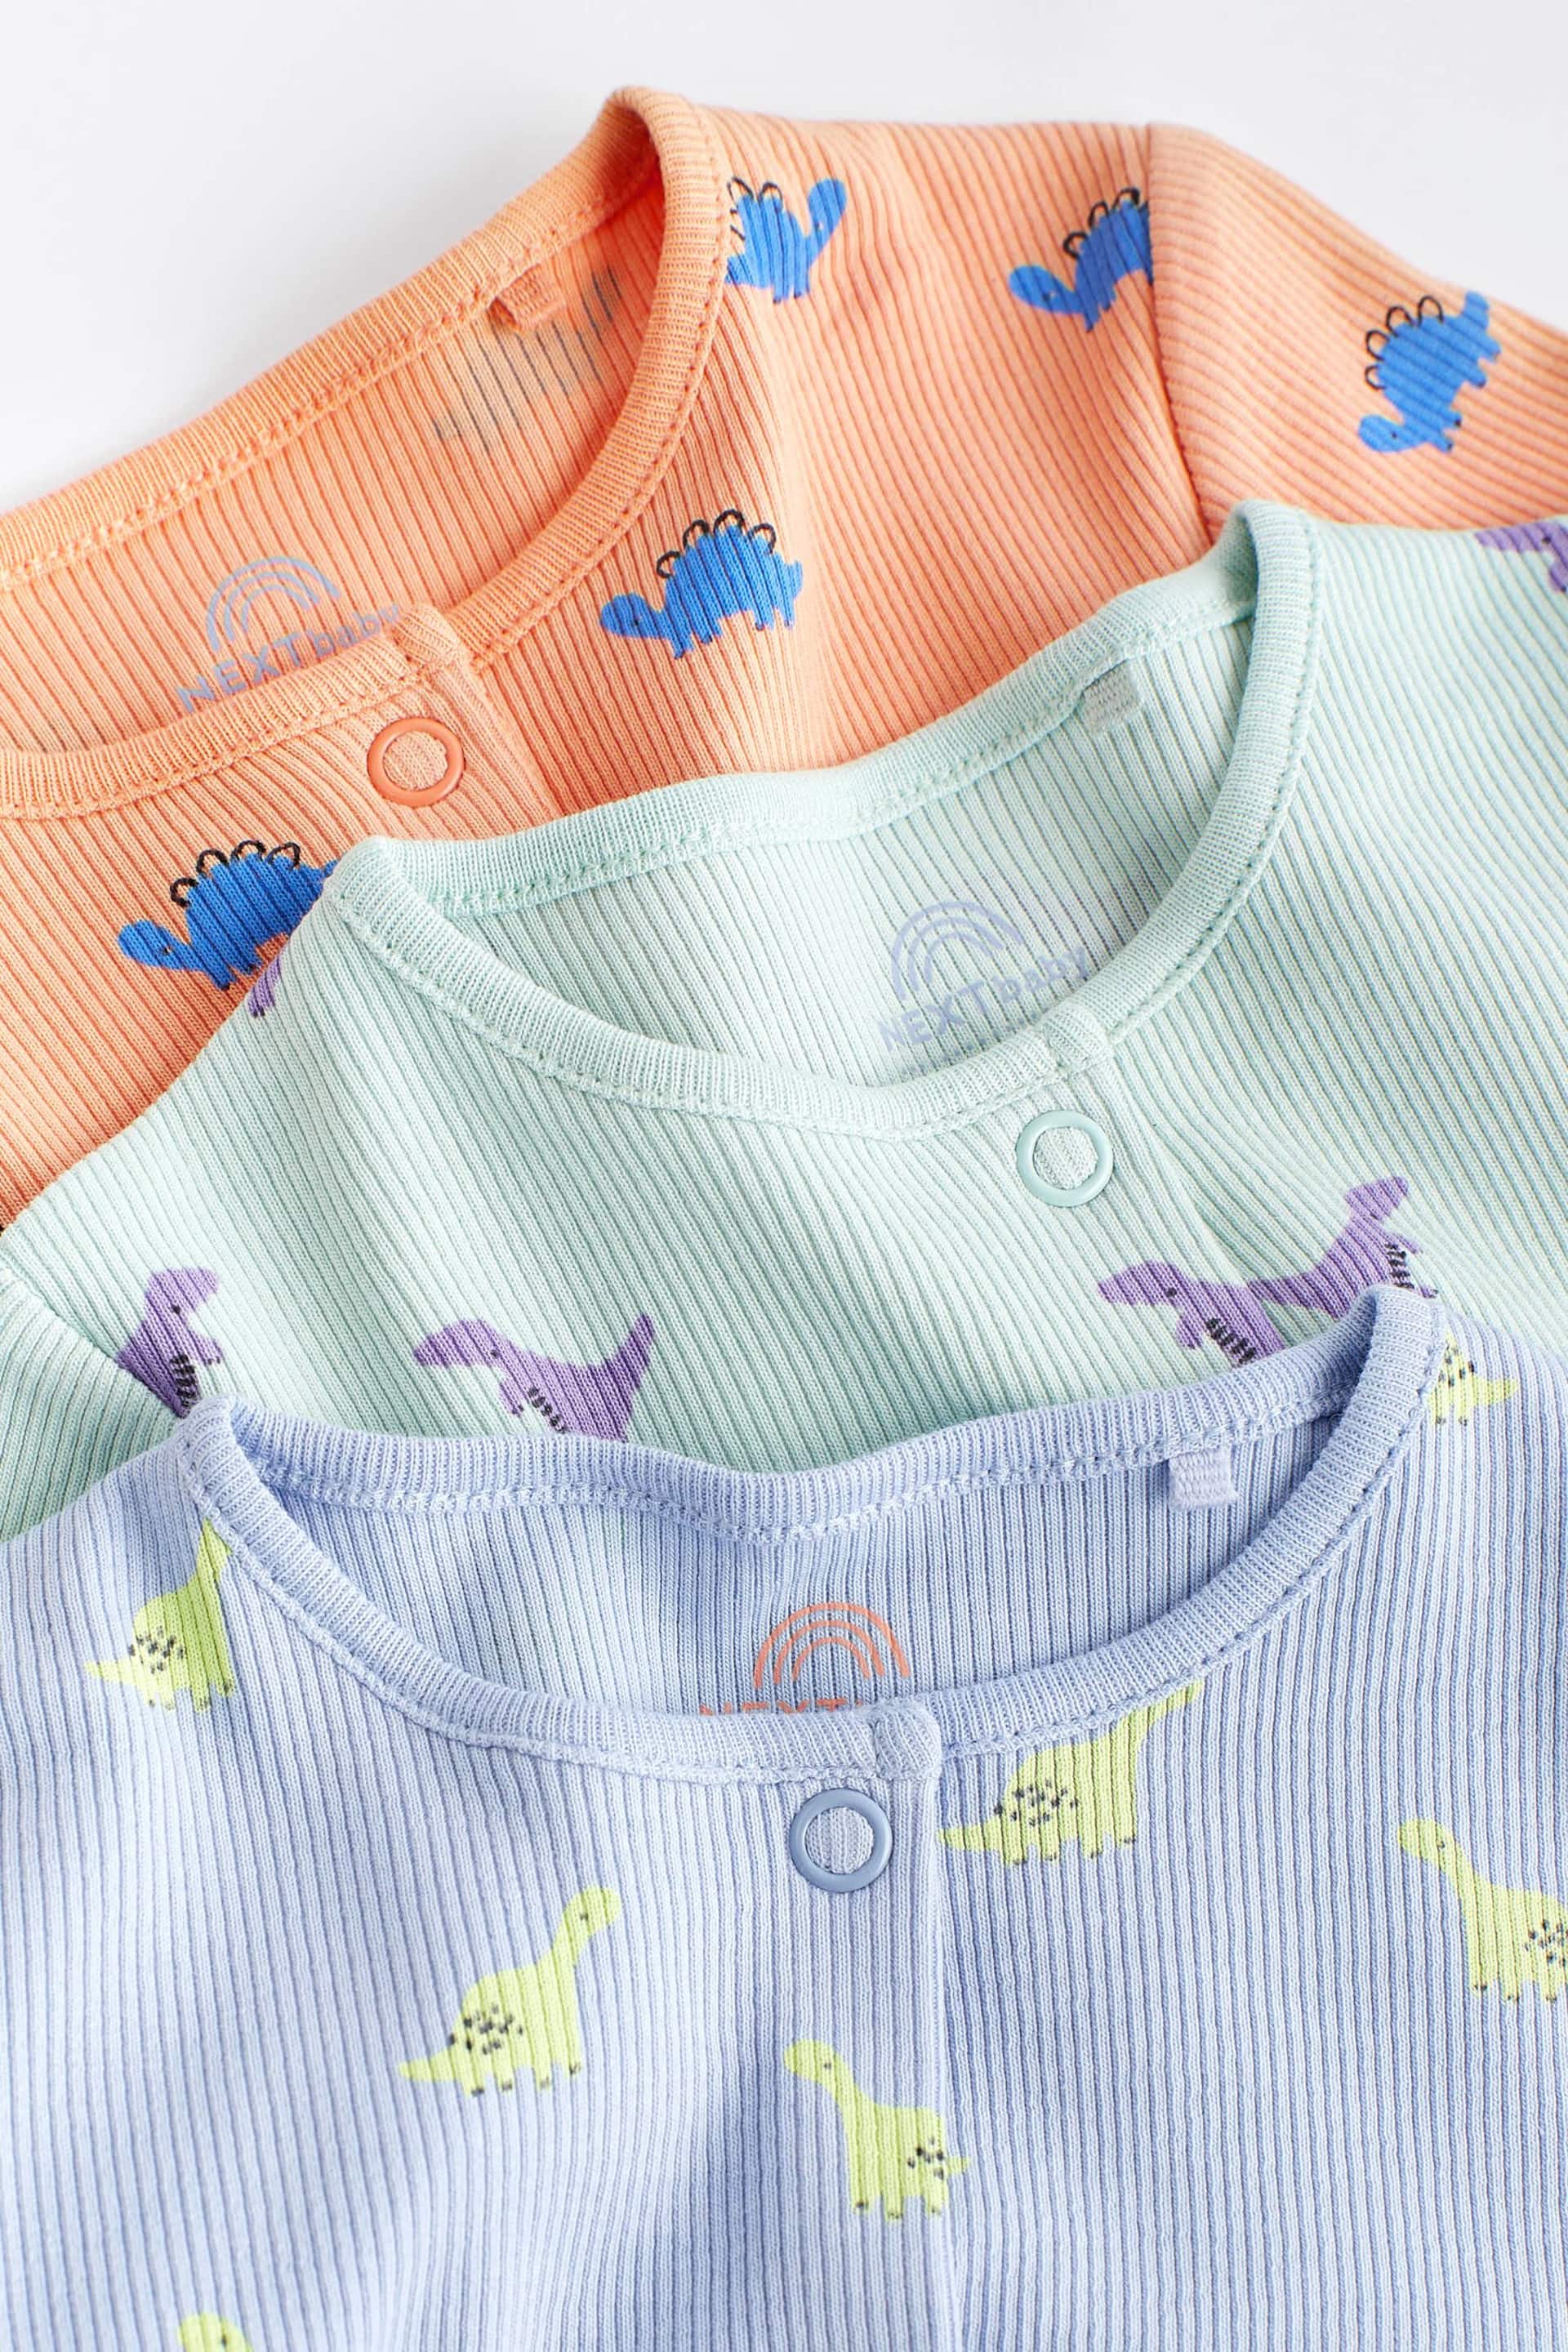 Bright Miniprint Dino Footless Baby Sleepsuit 3 Pack (0mths-3yrs) - Image 8 of 13